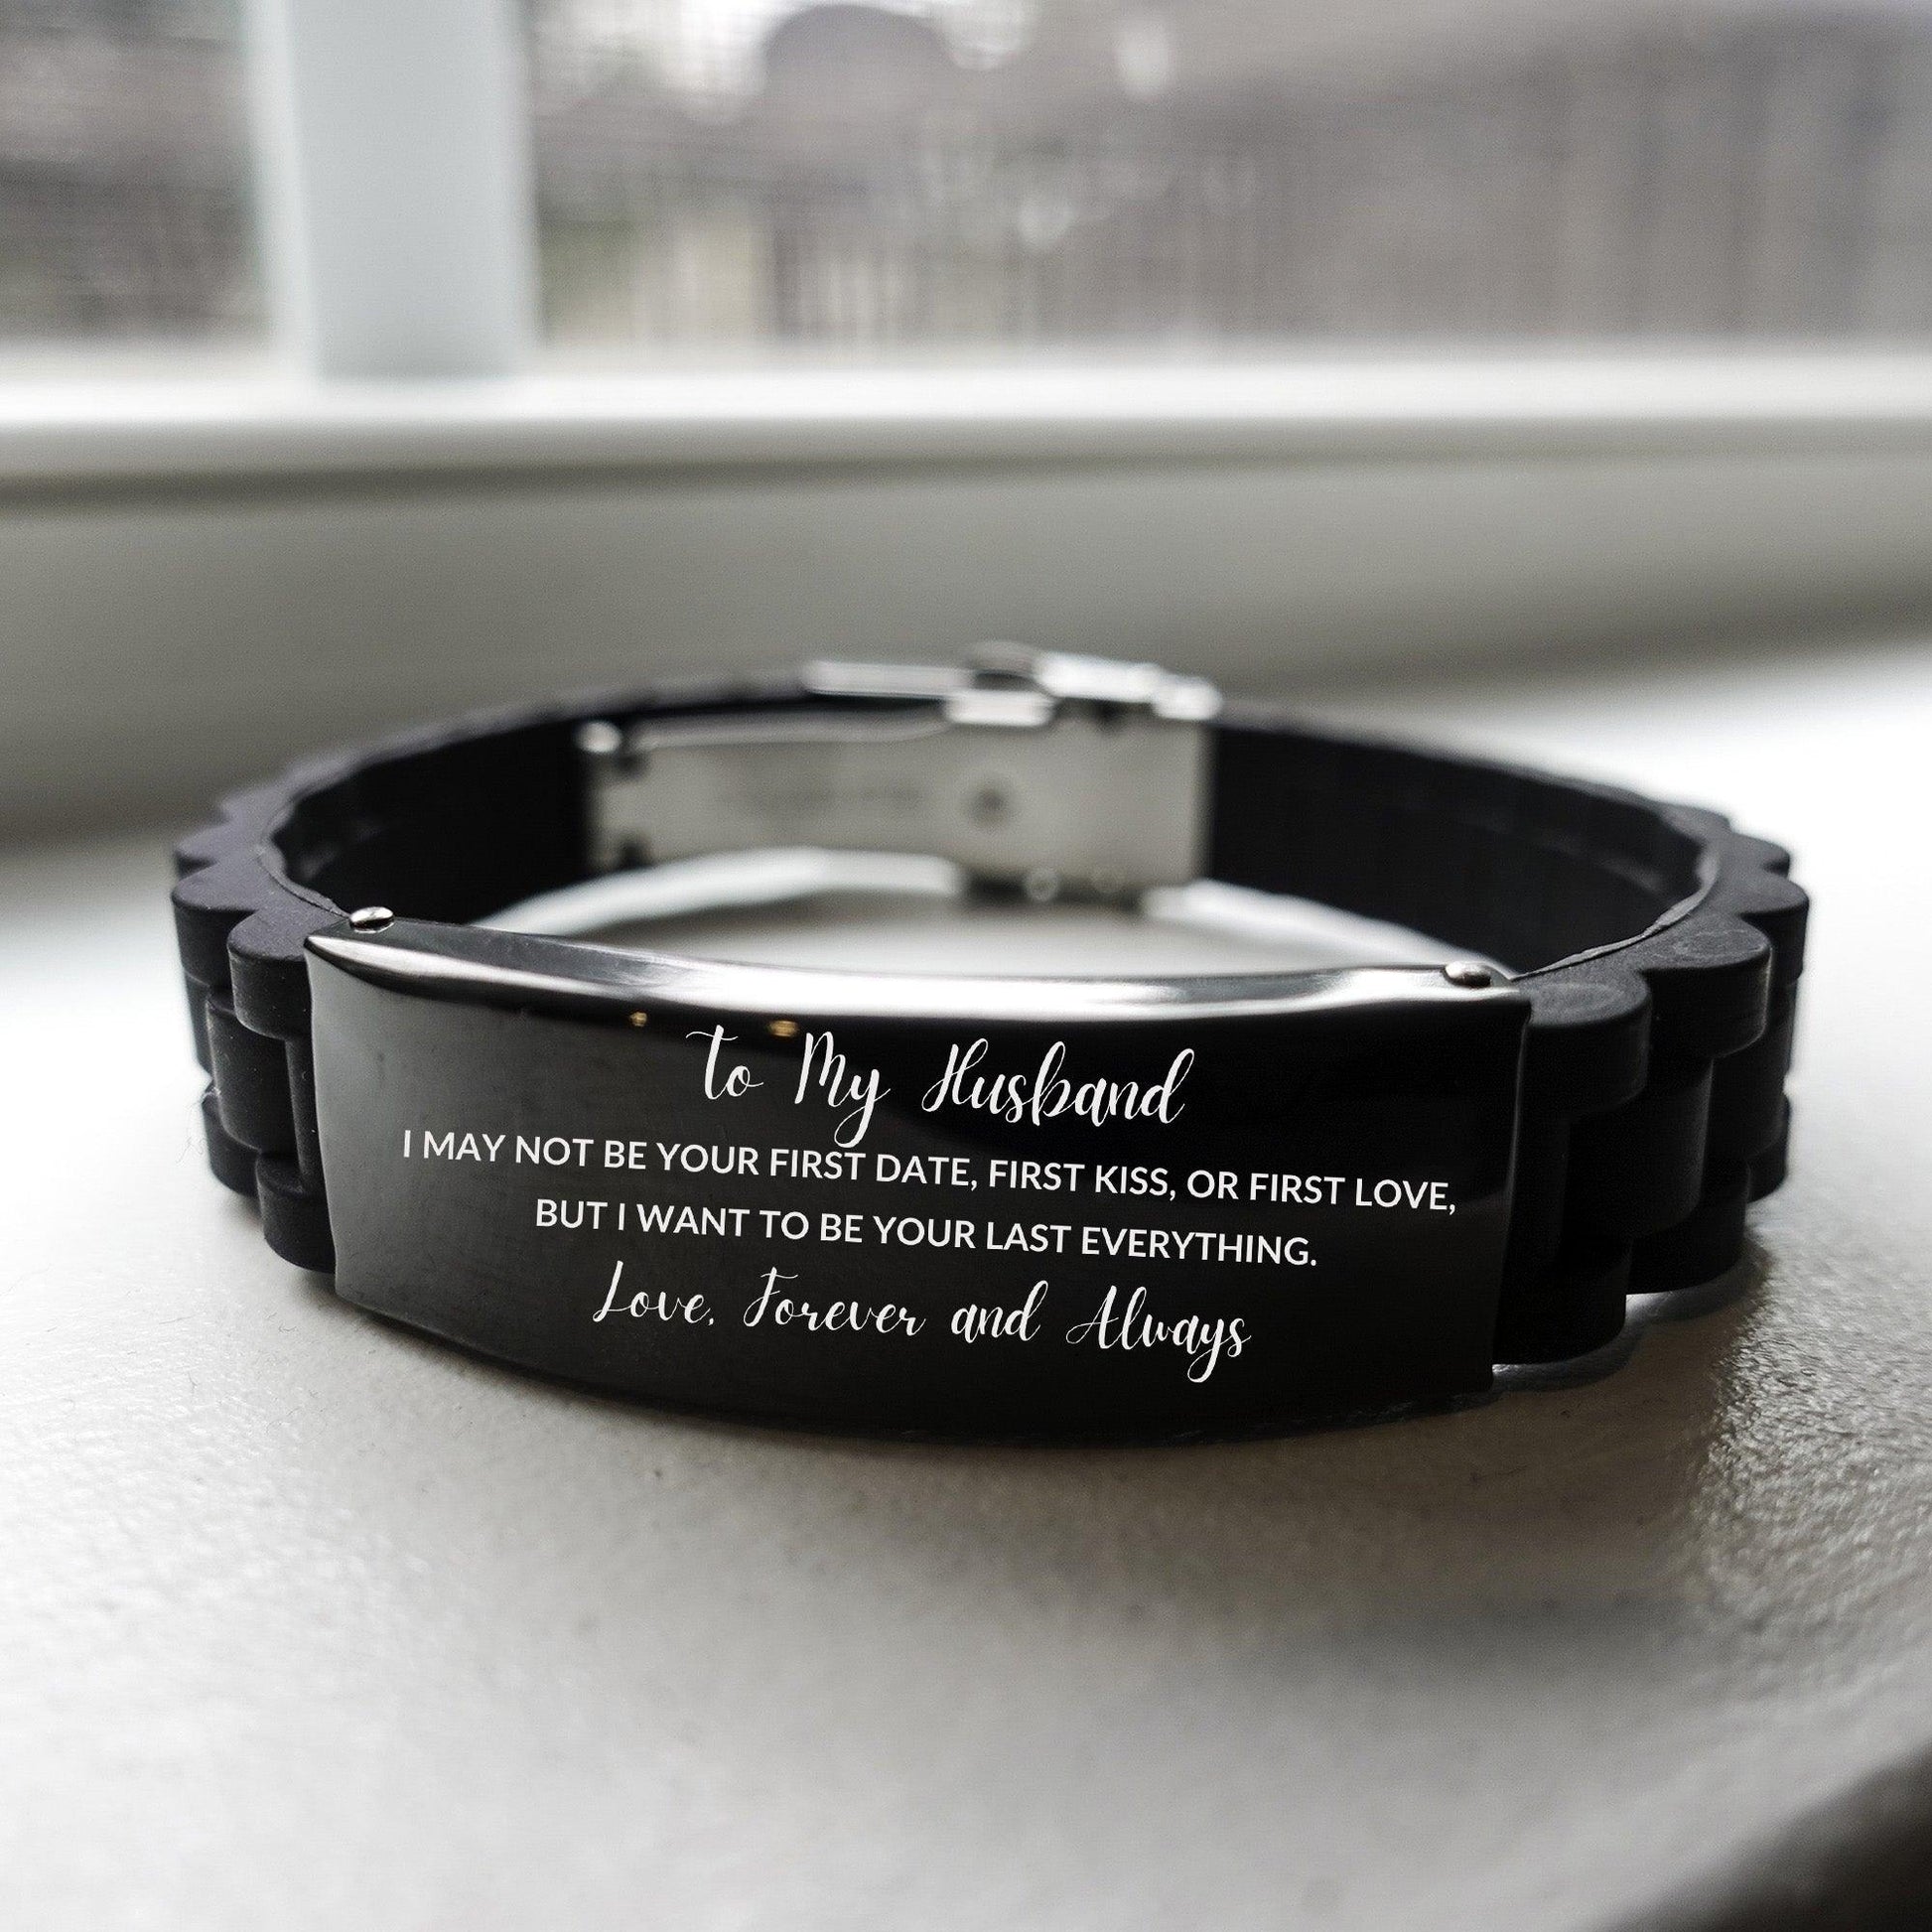 To My Husband I Want to Be Your Last Everything Engraved Black Glidelock Clasp Bracelet Romantic Valentine Gift dreams, never forget how amazing you are- Birthday, Christmas Holiday Gifts - Mallard Moon Gift Shop